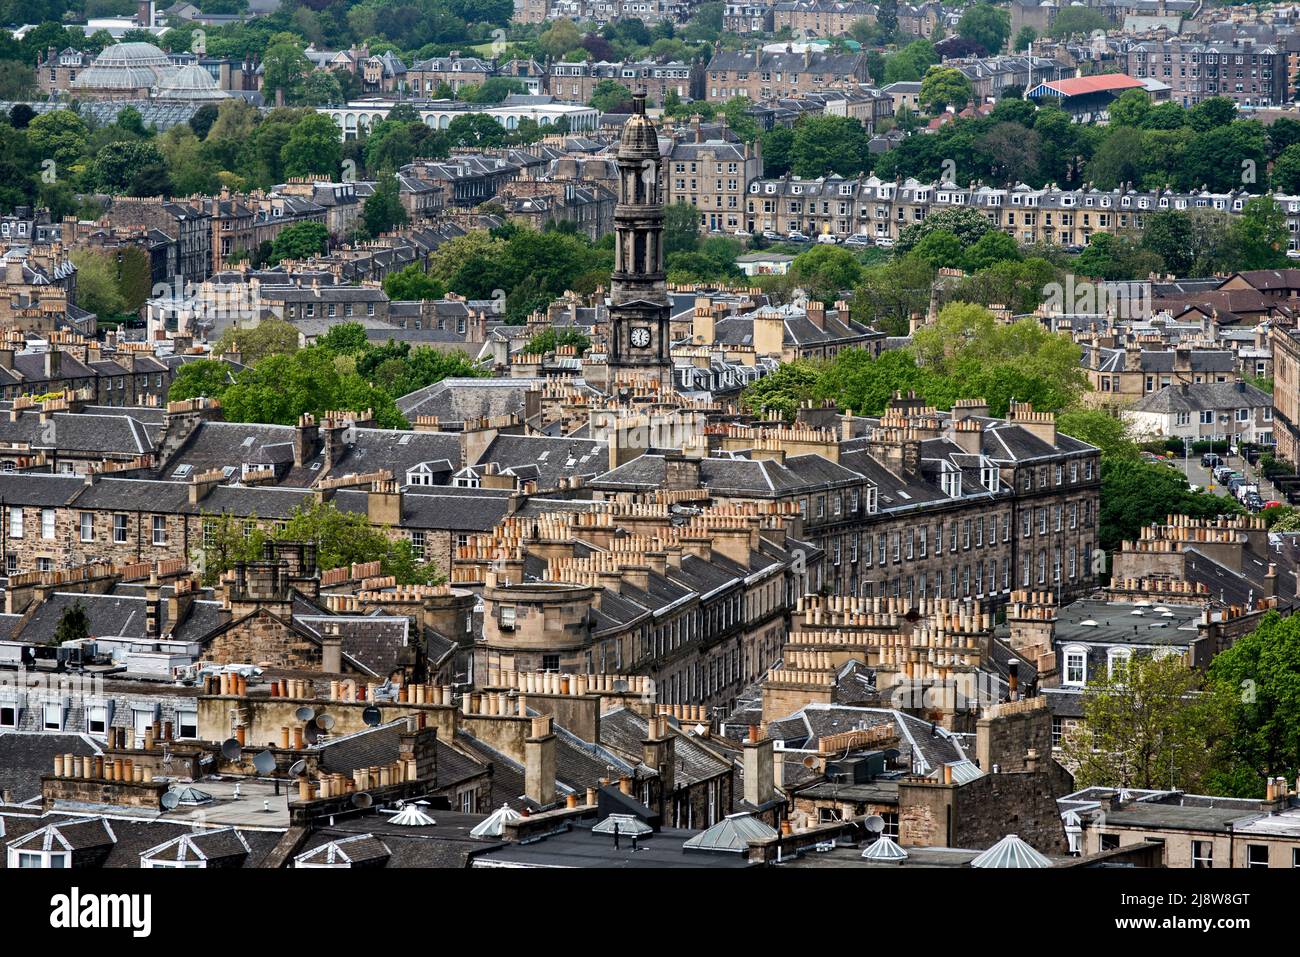 View of North Edinburgh and part of the New Town from Calton Hill, Edinburgh, Scotland, UK. Stock Photo